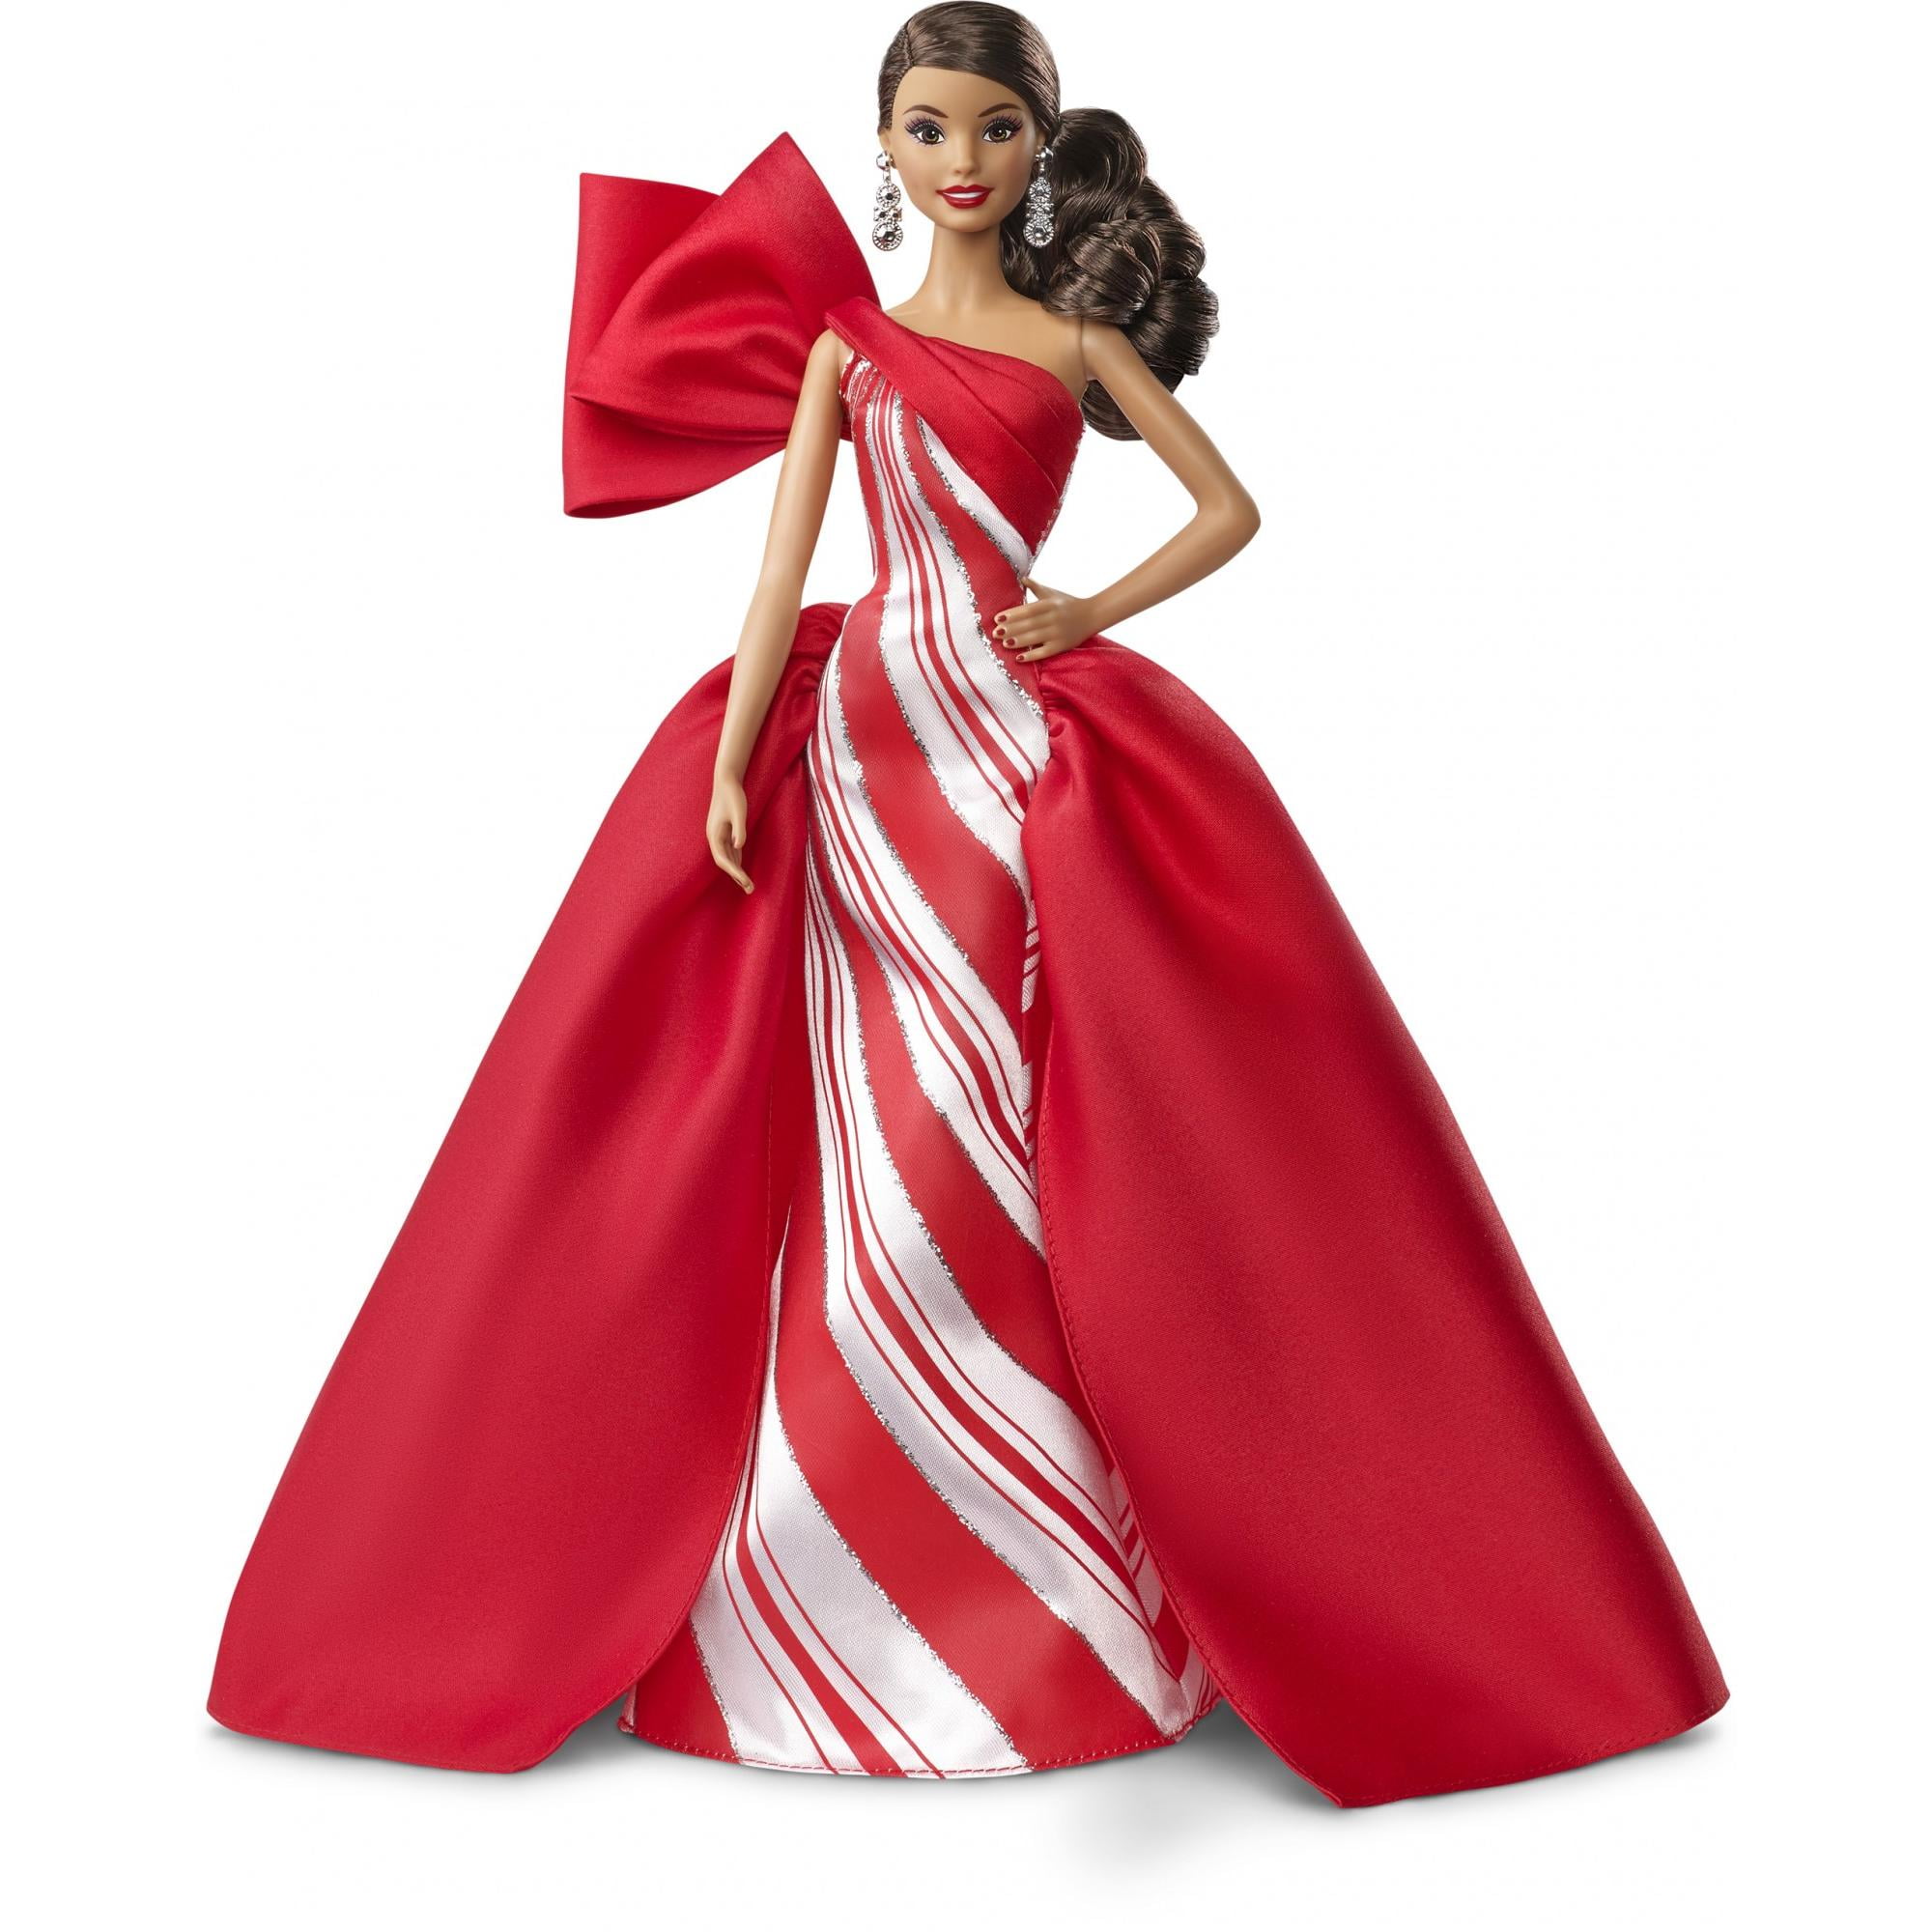 Amazon.com: Barbie Fashions Complete Look - Floral Red Dress : Toys & Games